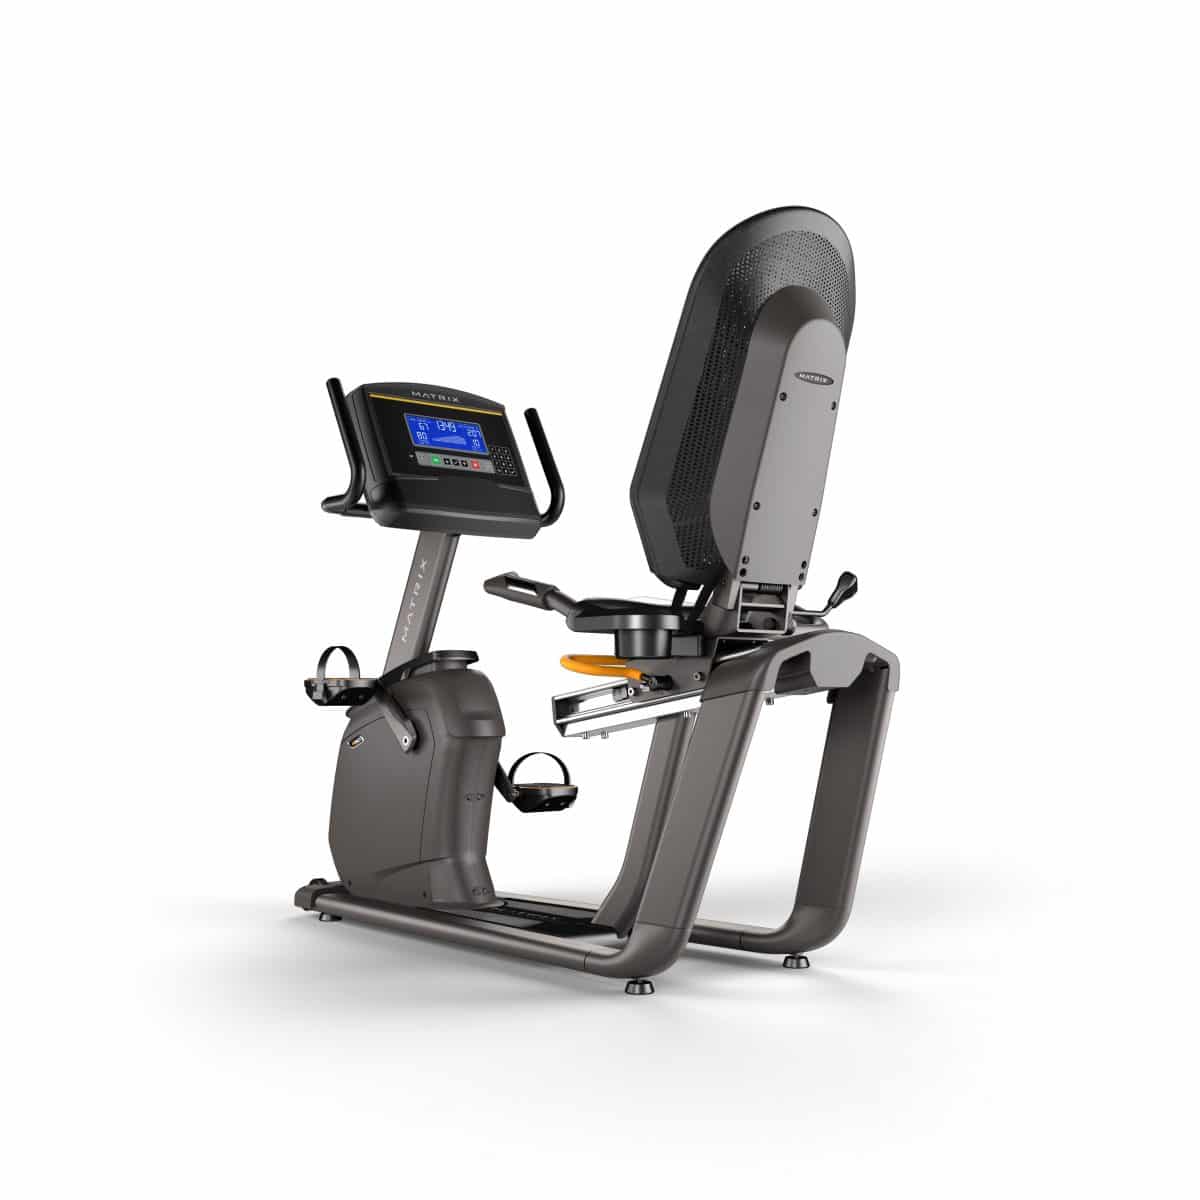 An exercise bike with a monitor on the back of it